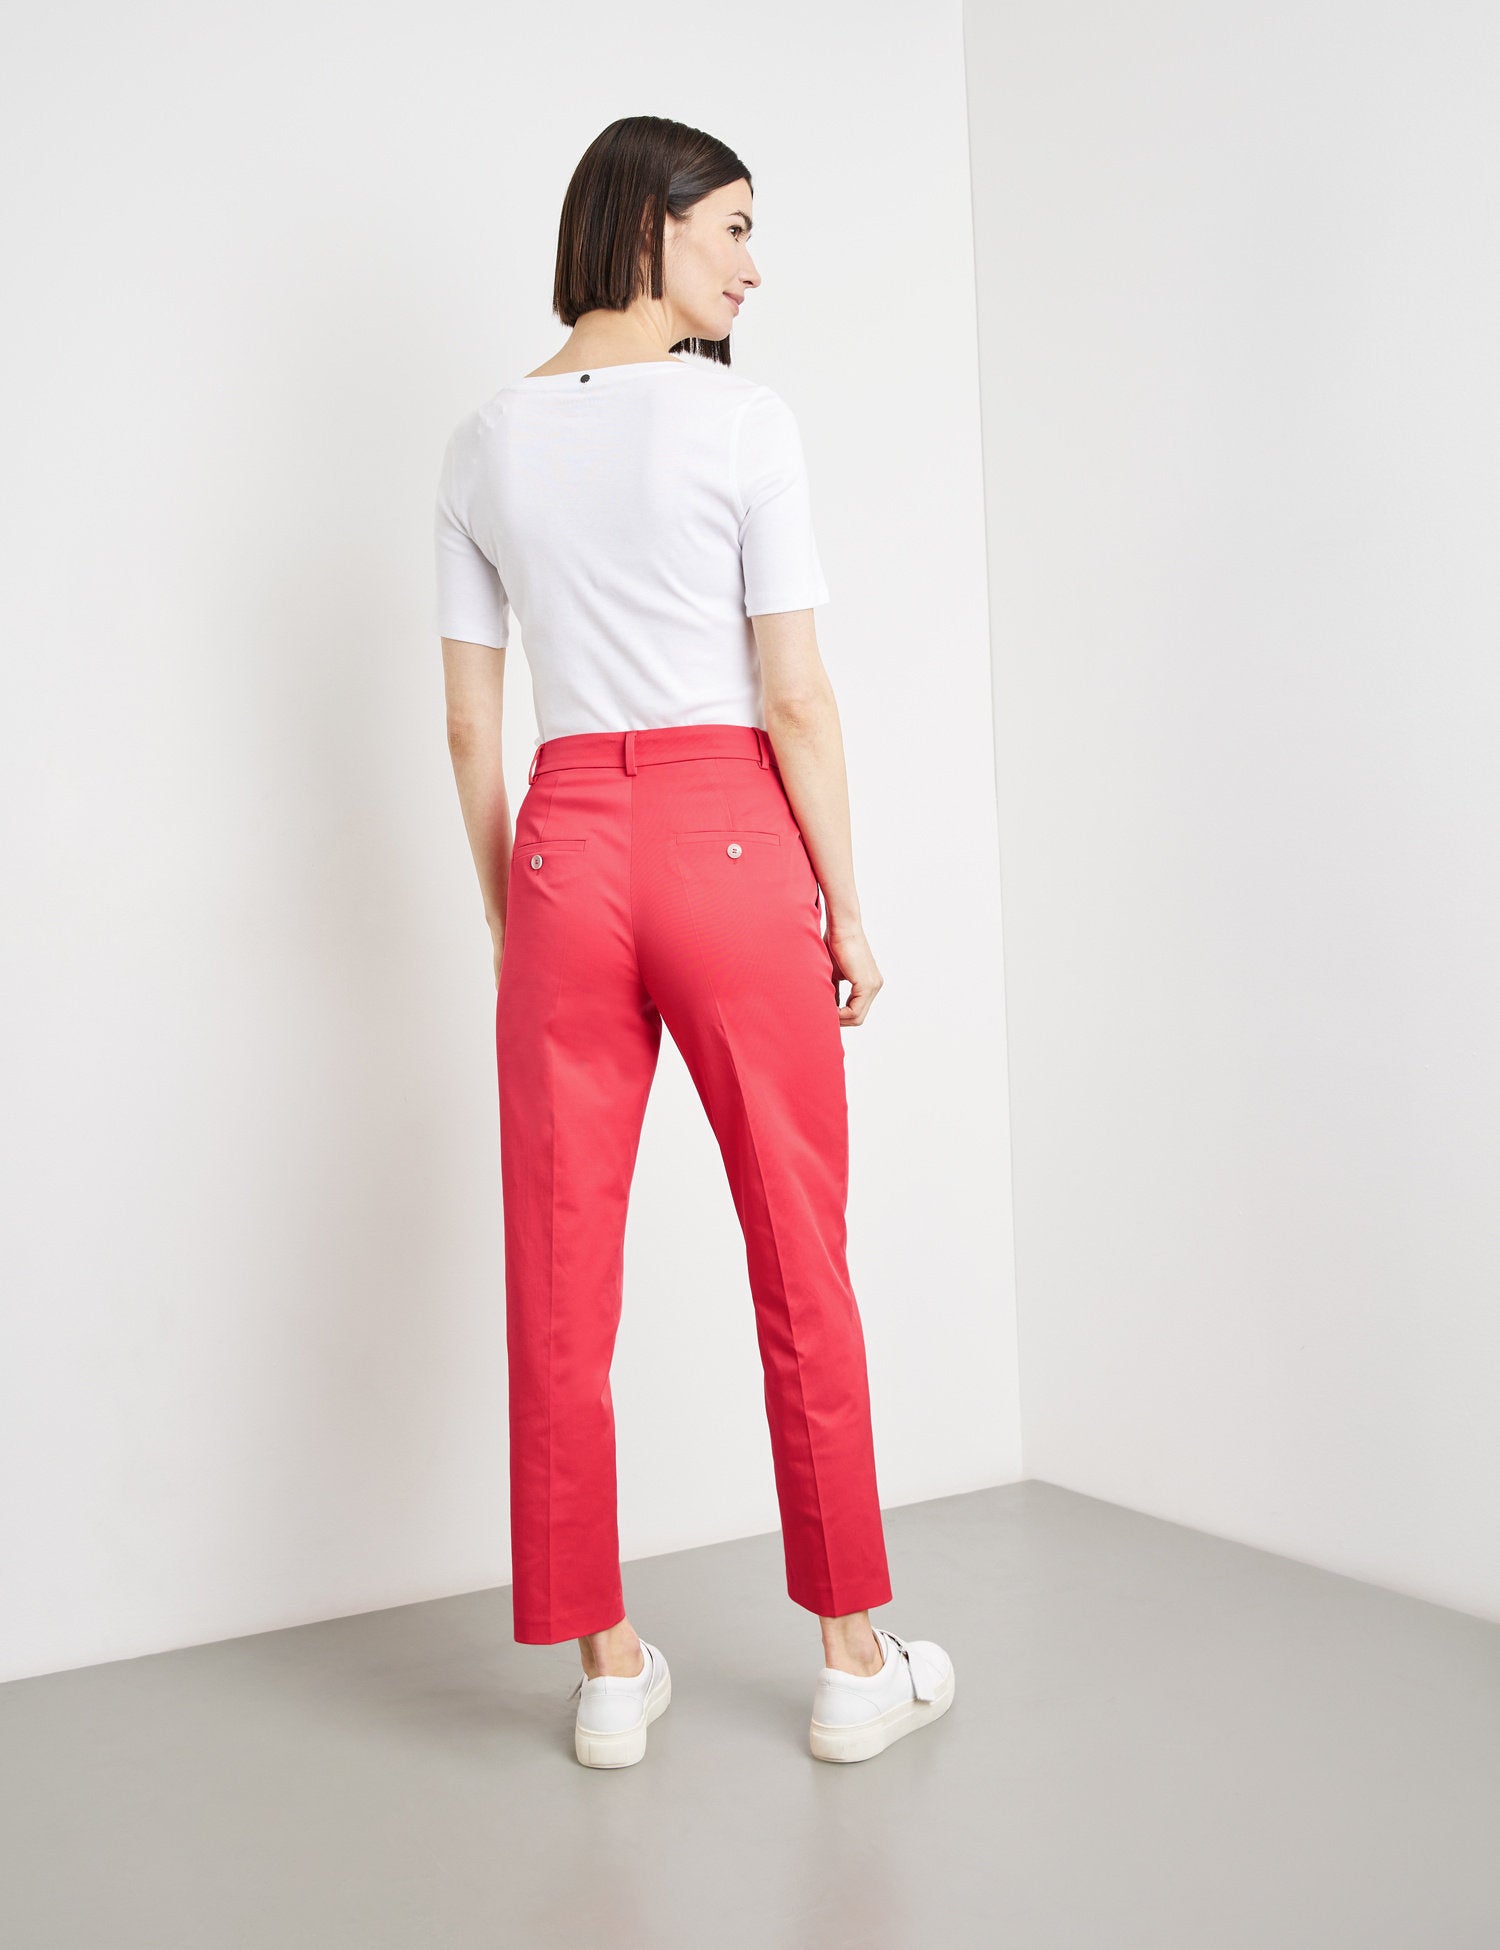 Elegant Trousers With Pressed Pleats_320003-31332_60140_06